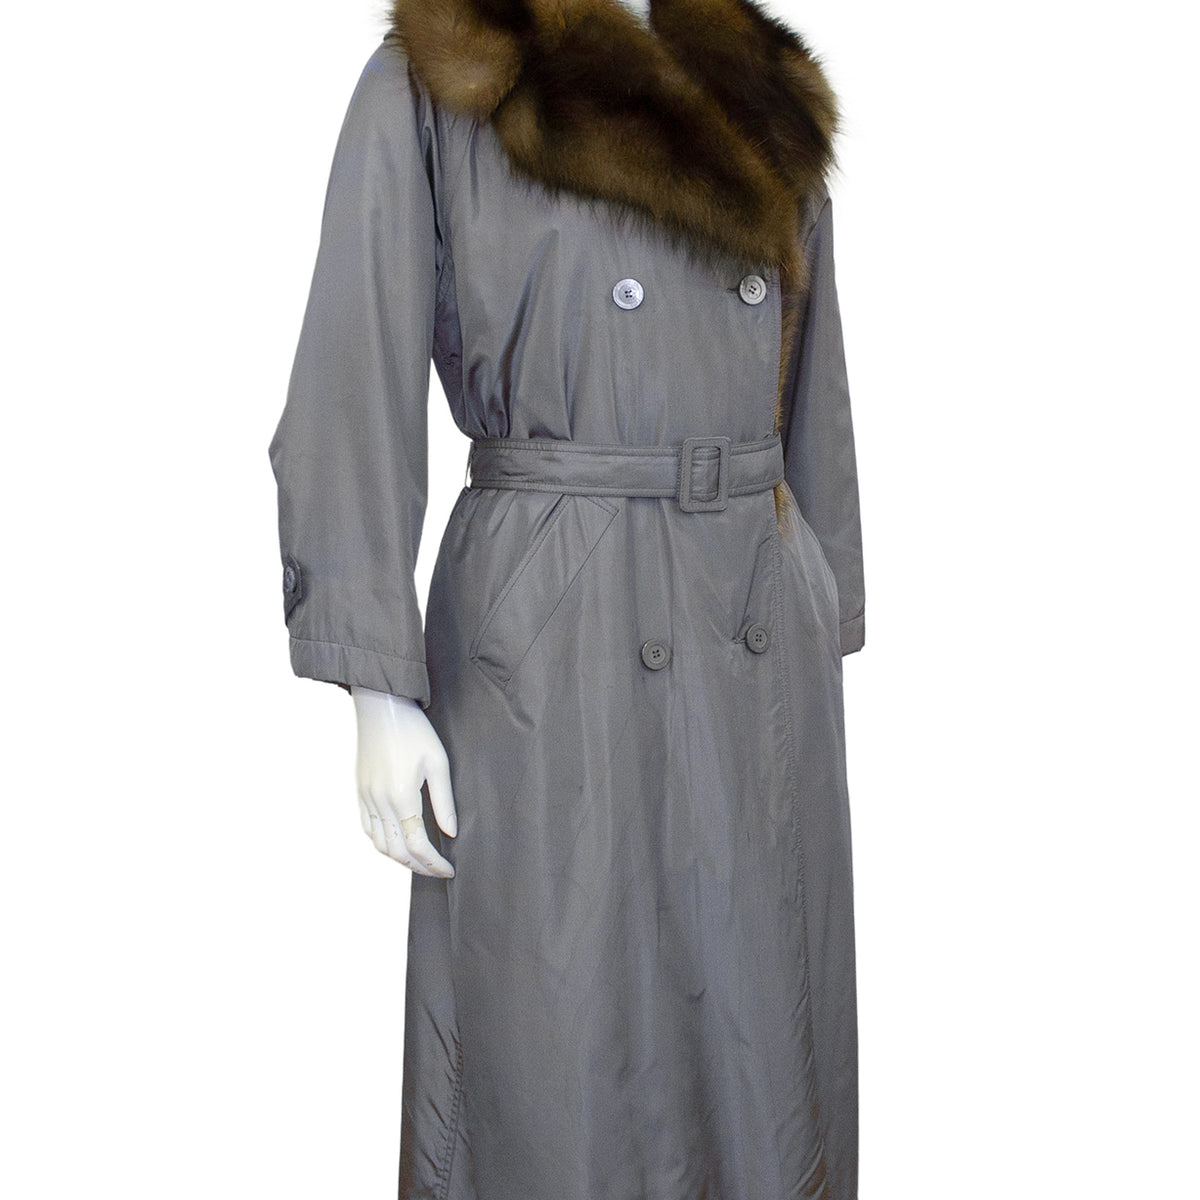 Autumn/Winter 1977 Haute Couture Trench Coat with Fur Collar